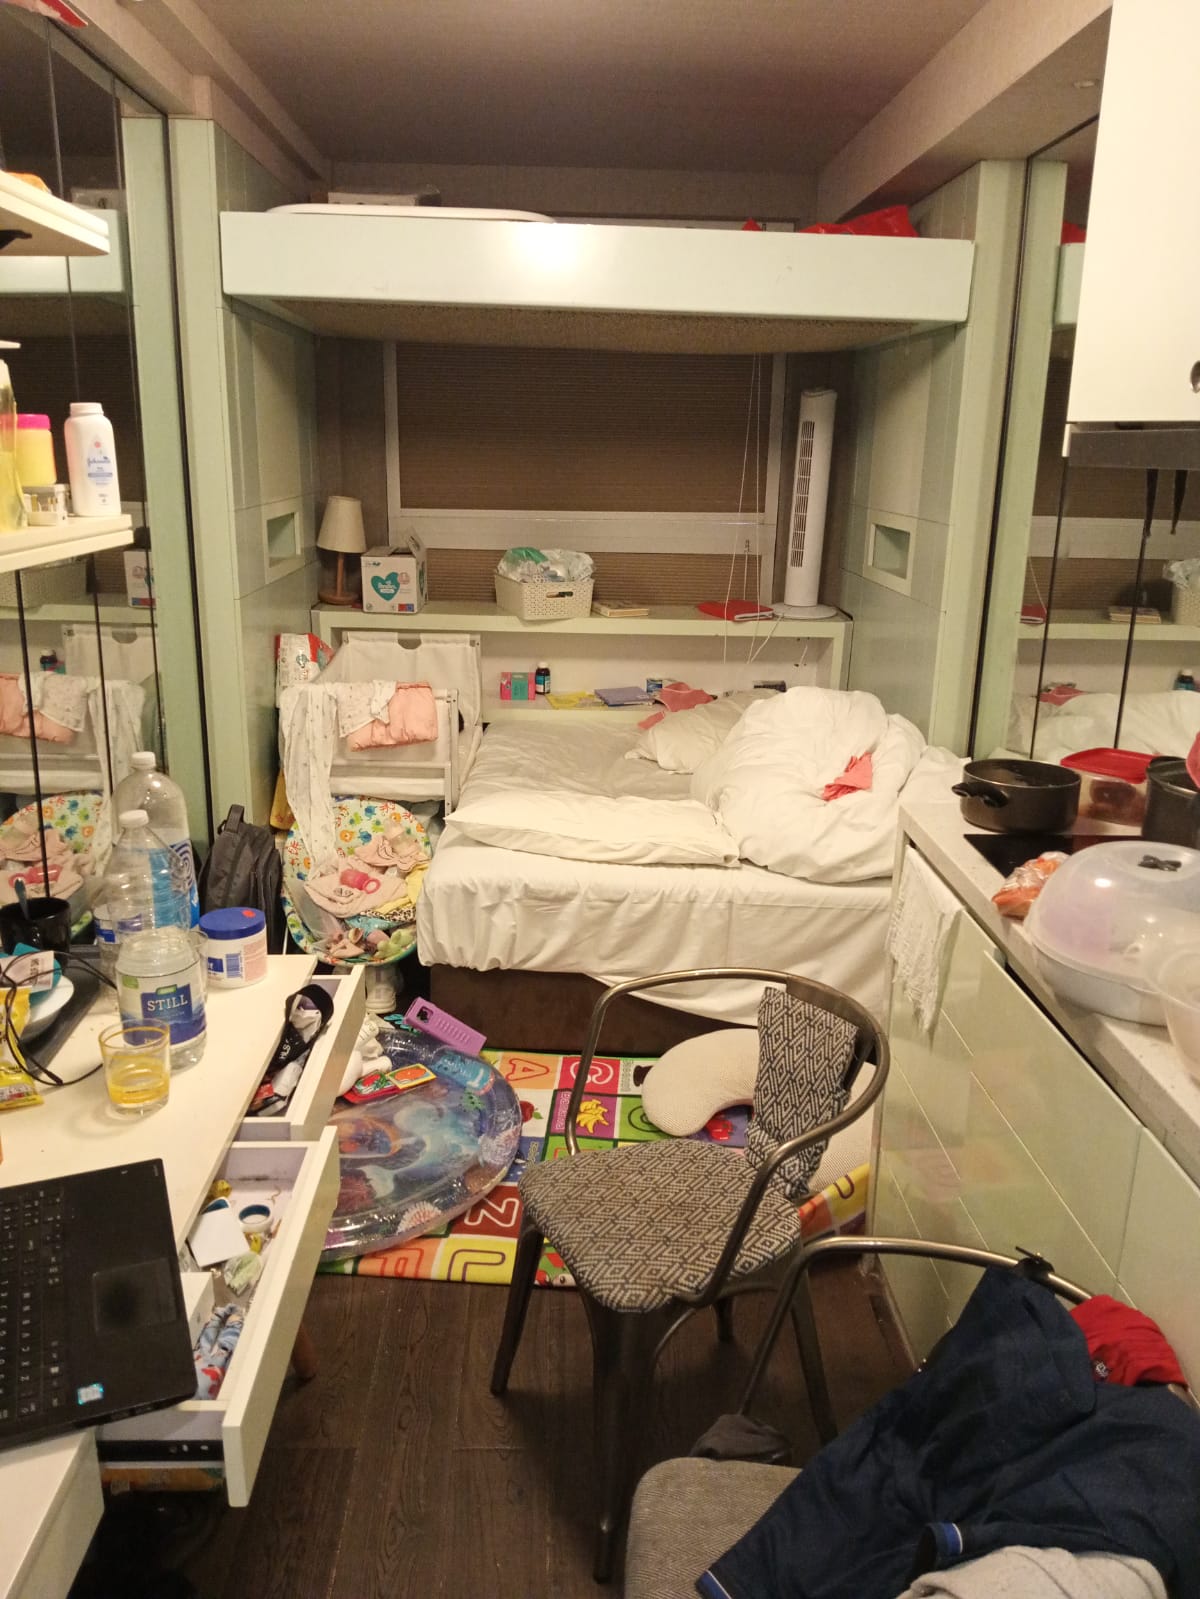 One family of three, two adults and their nine-month-old baby, have been living in this small cramped hotel room for almost a year